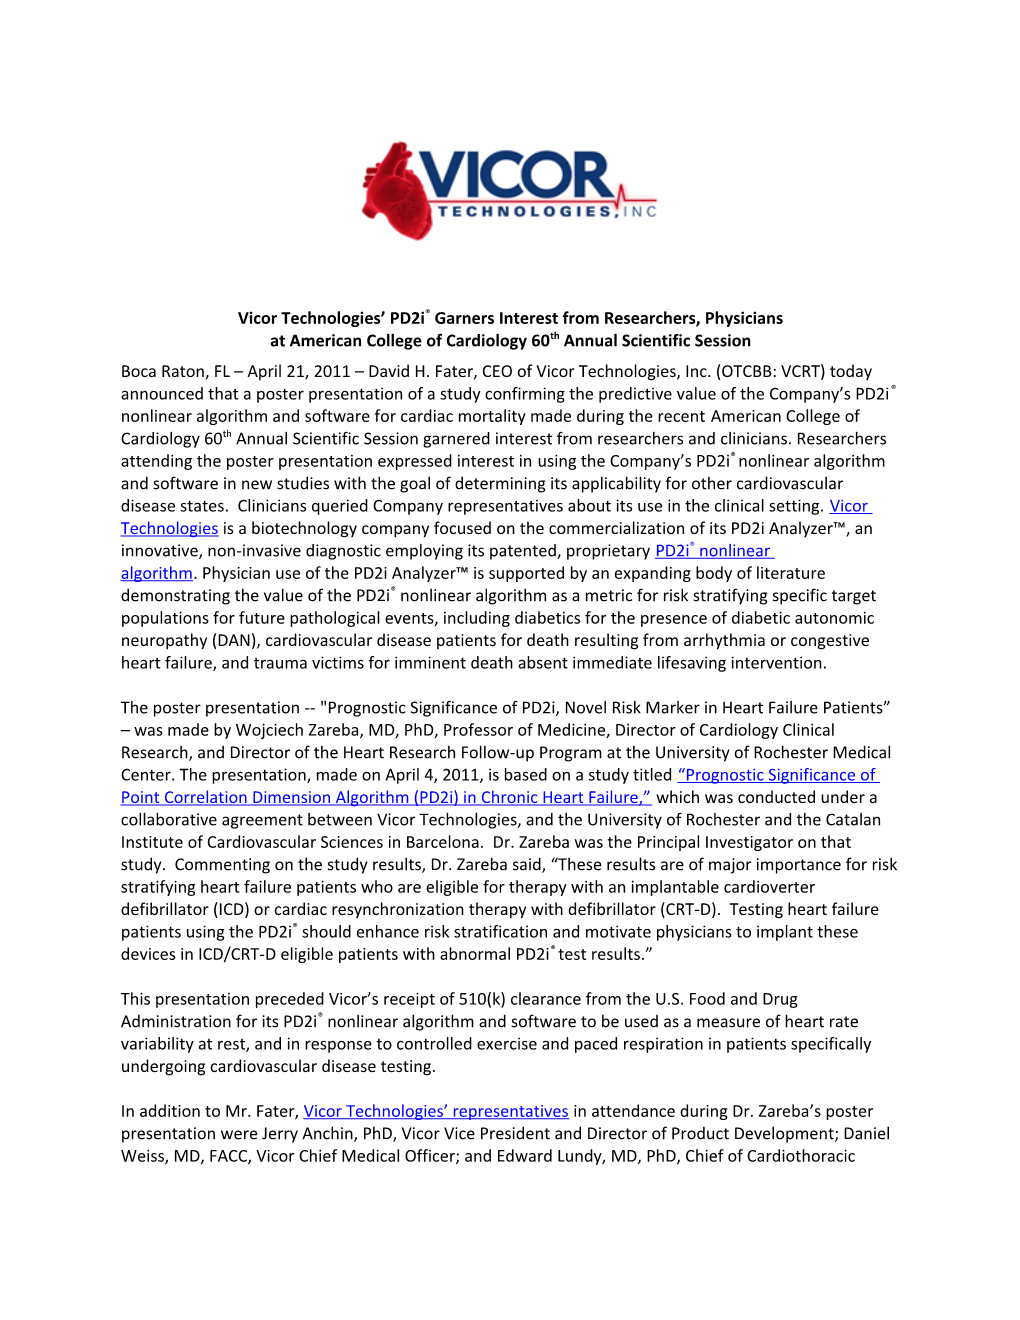 Vicor Technologies Pd2i Garners Interest from Researchers, Physicians at American College